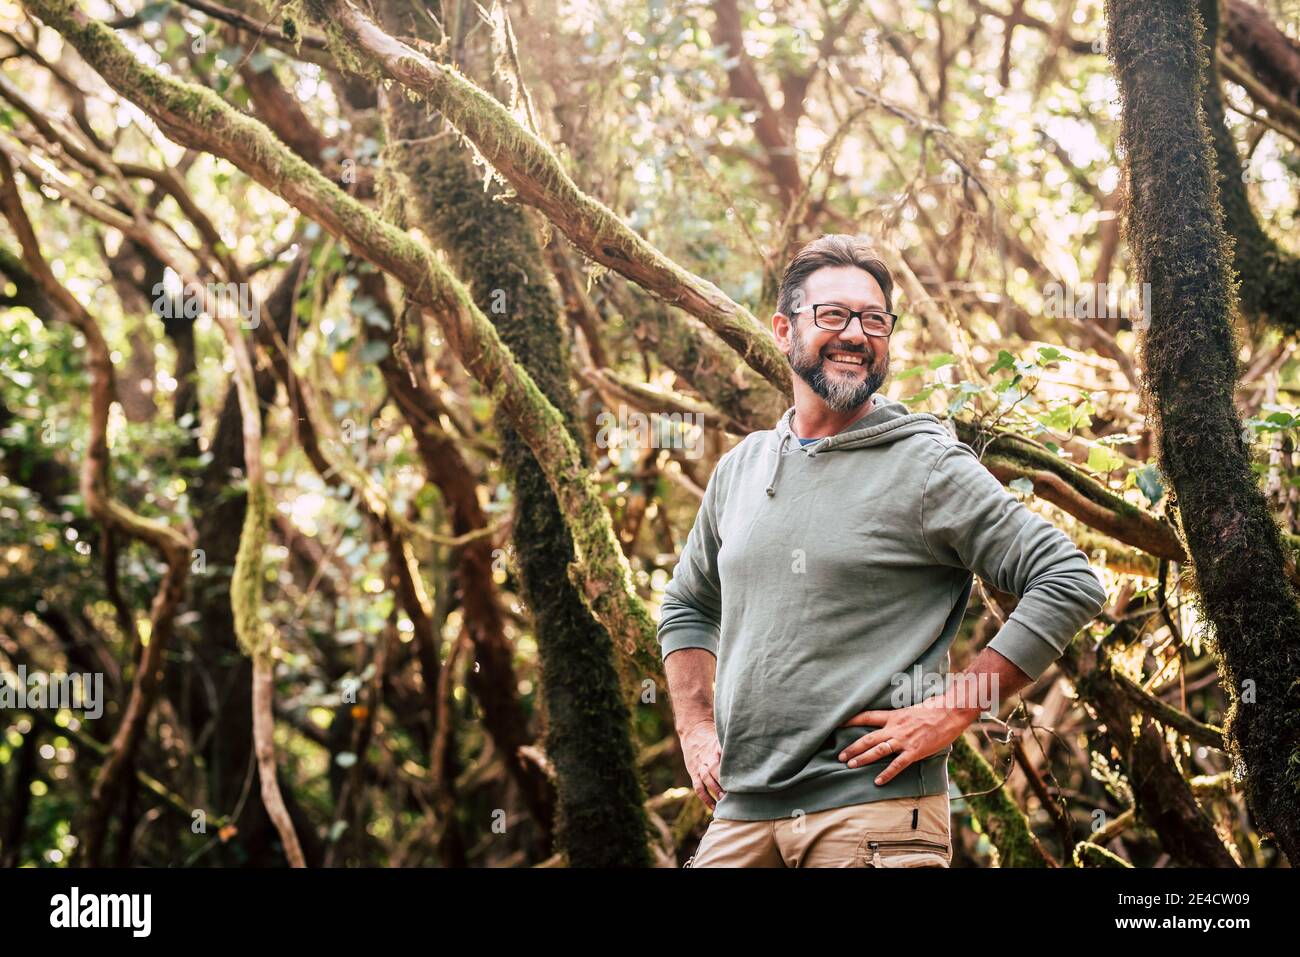 Cheerful handsome adult man portrait in outdoor park leisure activity with trees and forest wood in background - people embracing outdoors nature life and have fun adventure Stock Photo